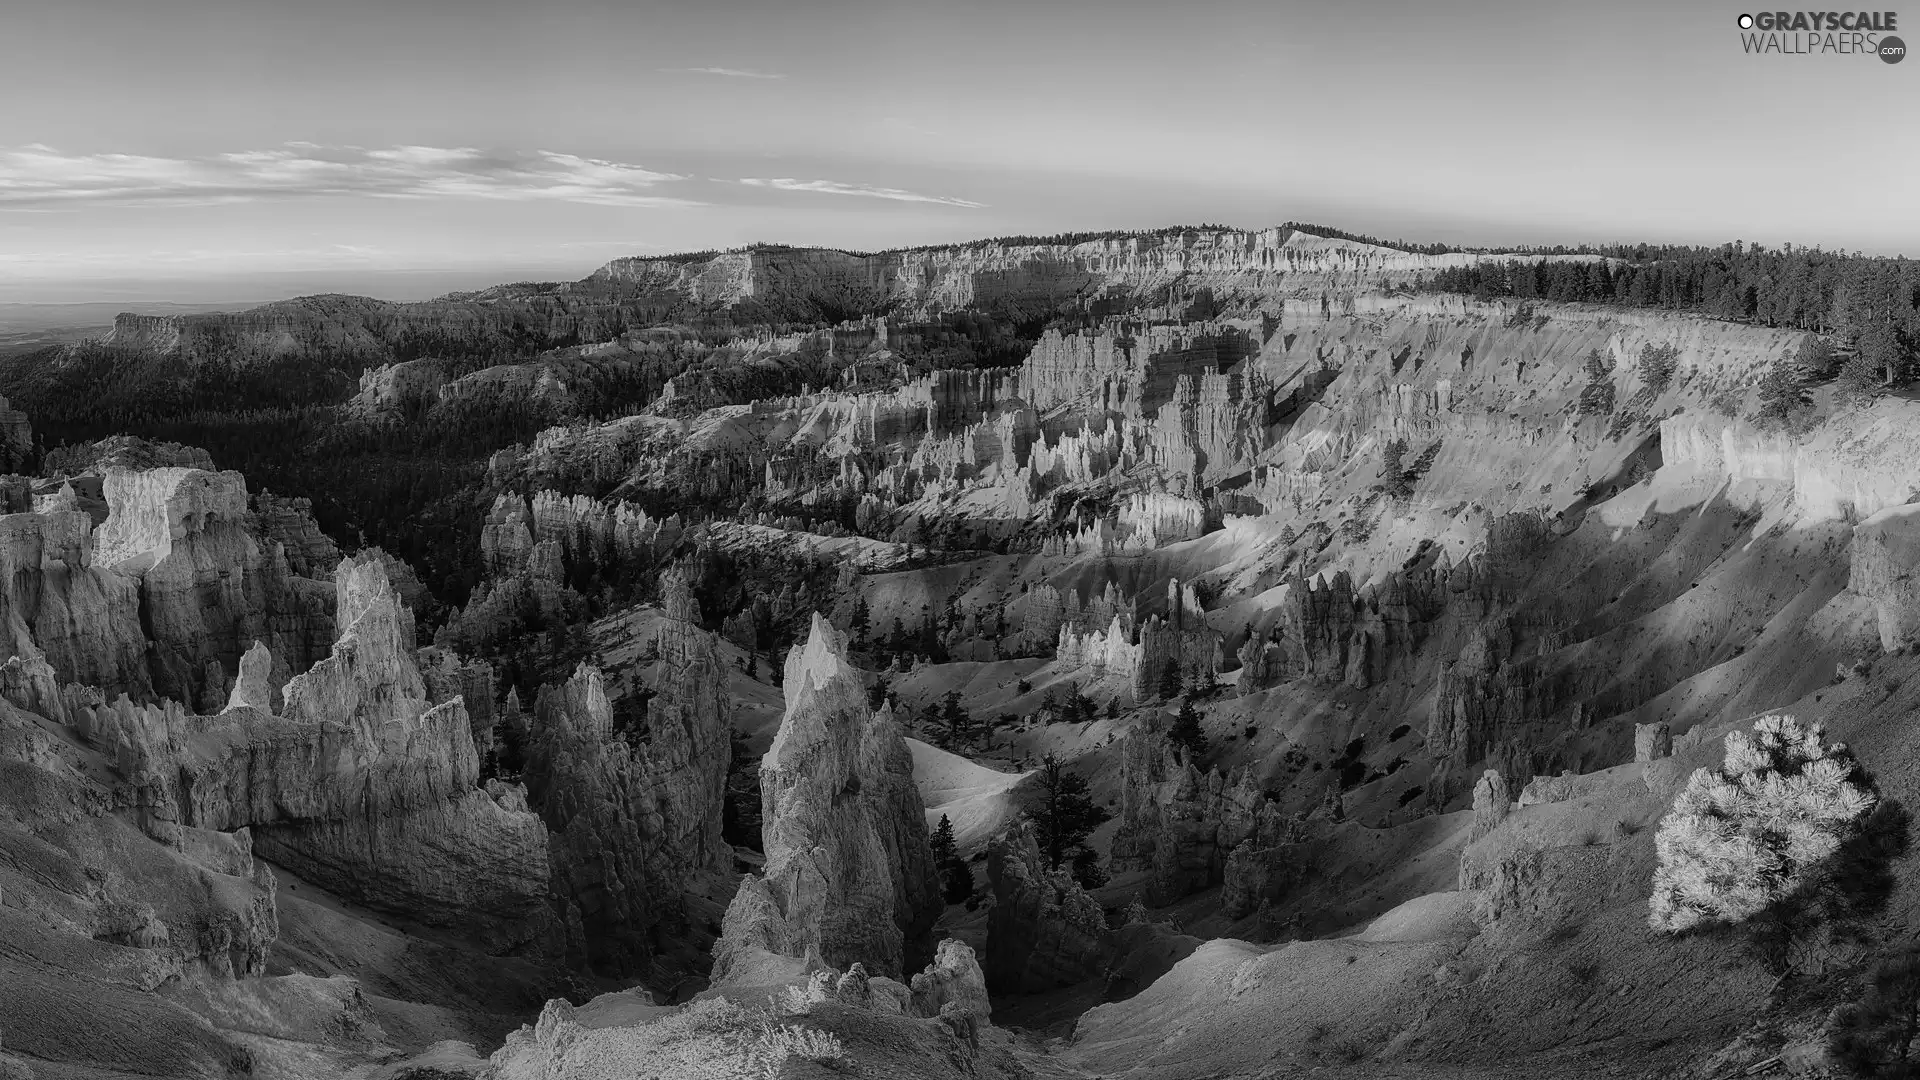 Utah State, The United States, rocks, Bryce Canyon National Park, canyon